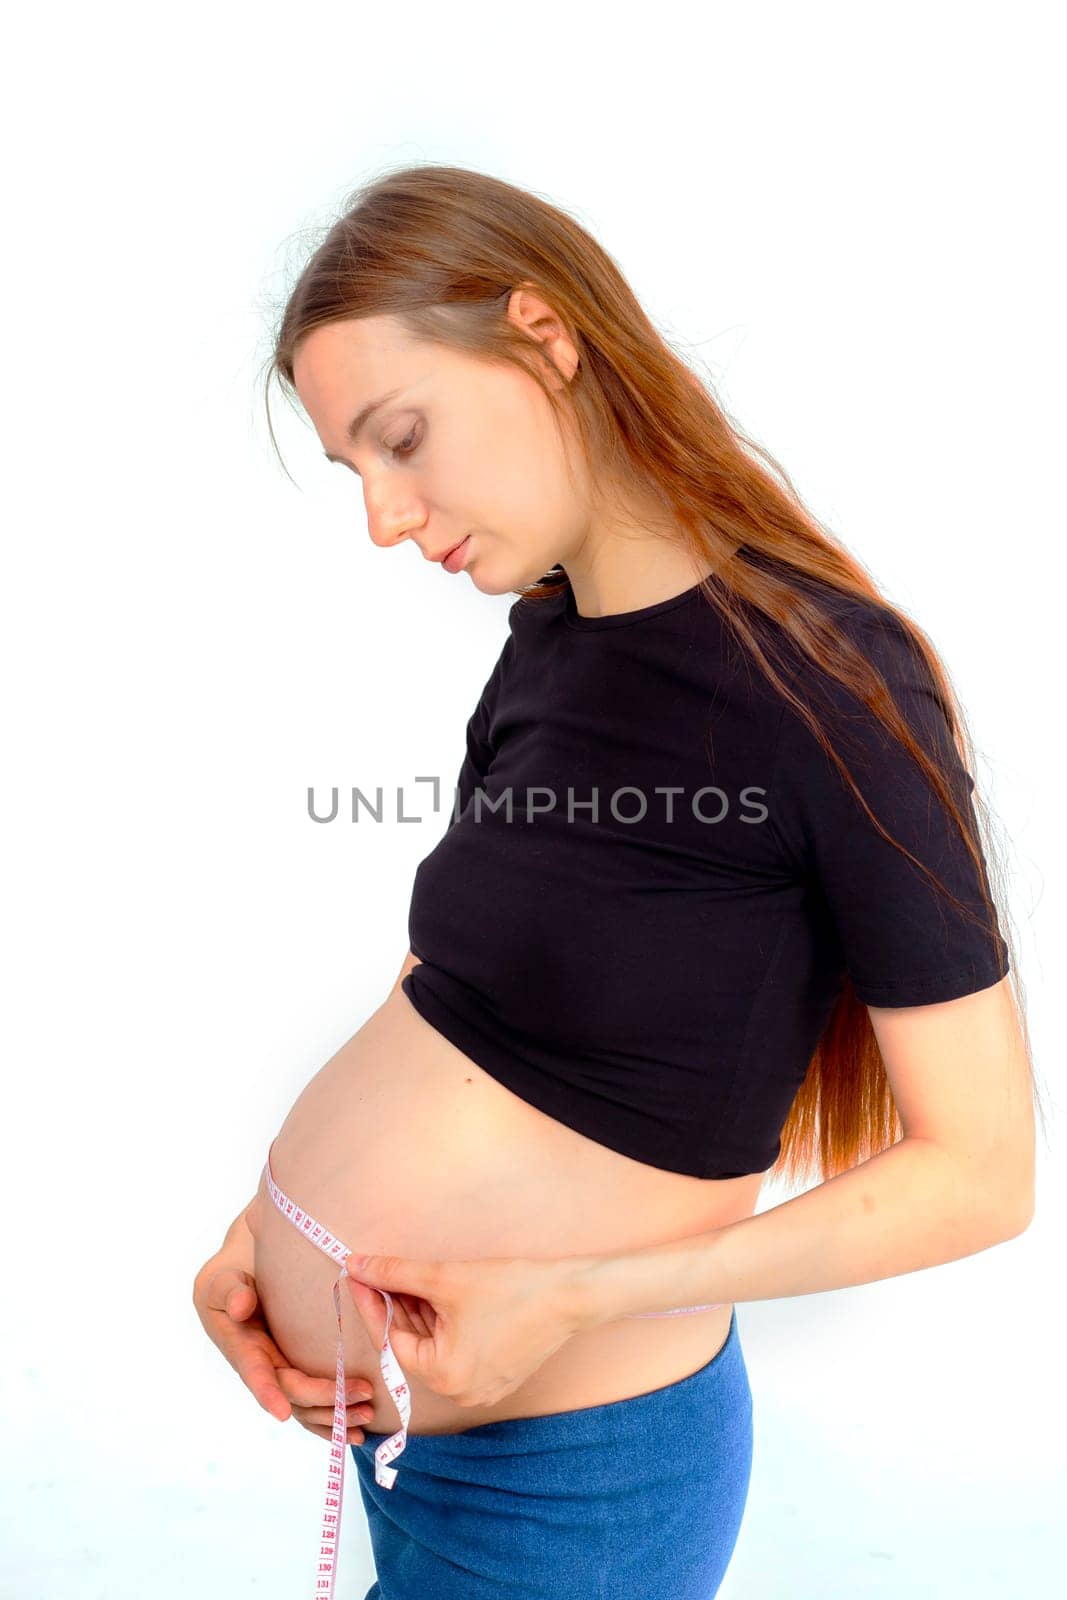 Pregnant woman measuring stomach with measuring tape by kajasja